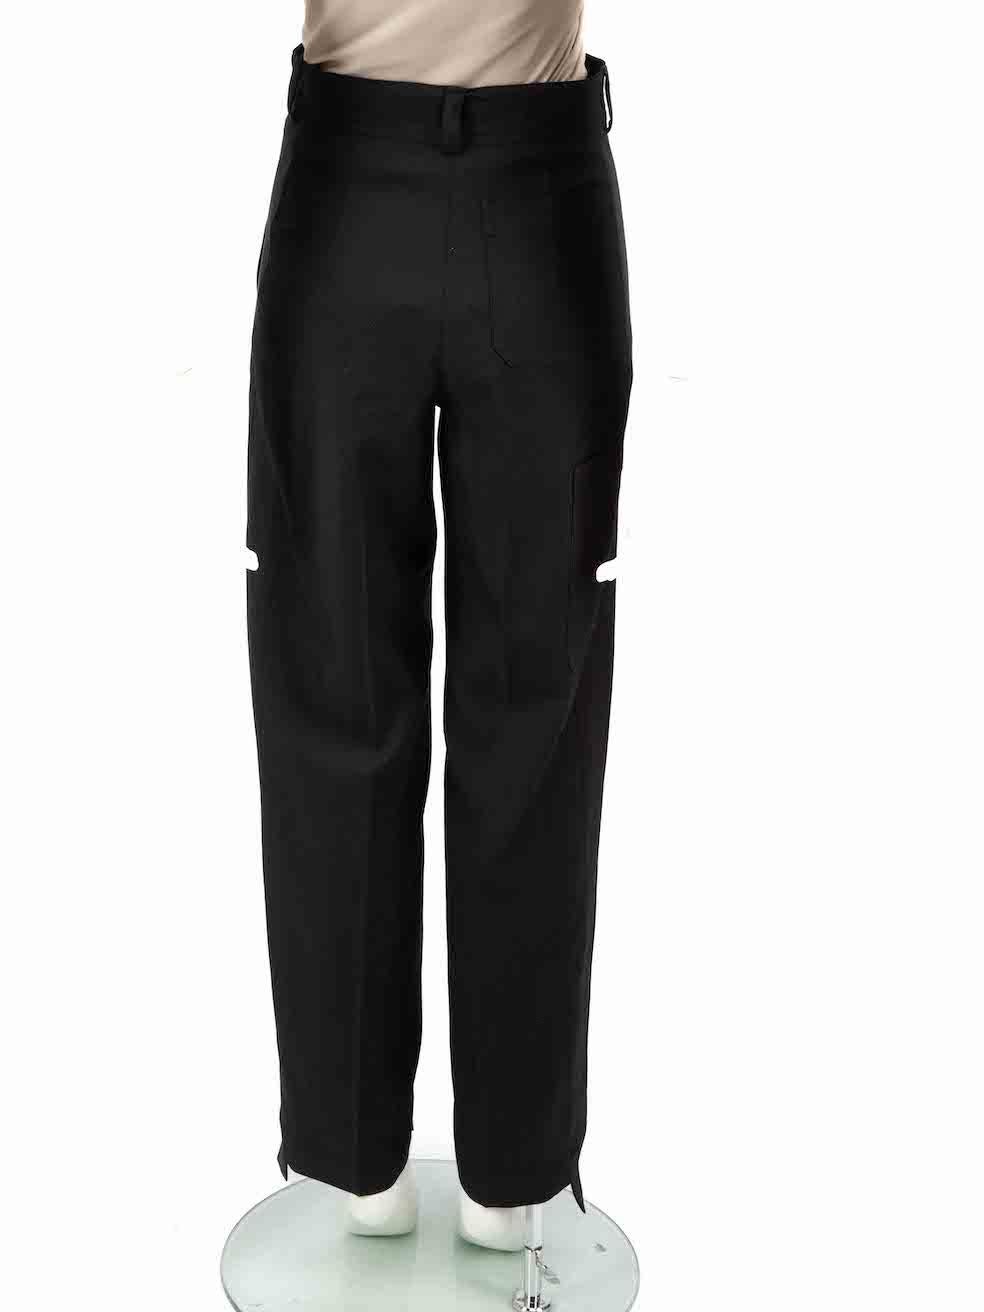 Stella McCartney Black Straight Leg Mid Rise Trousers Size XXXS In New Condition For Sale In London, GB